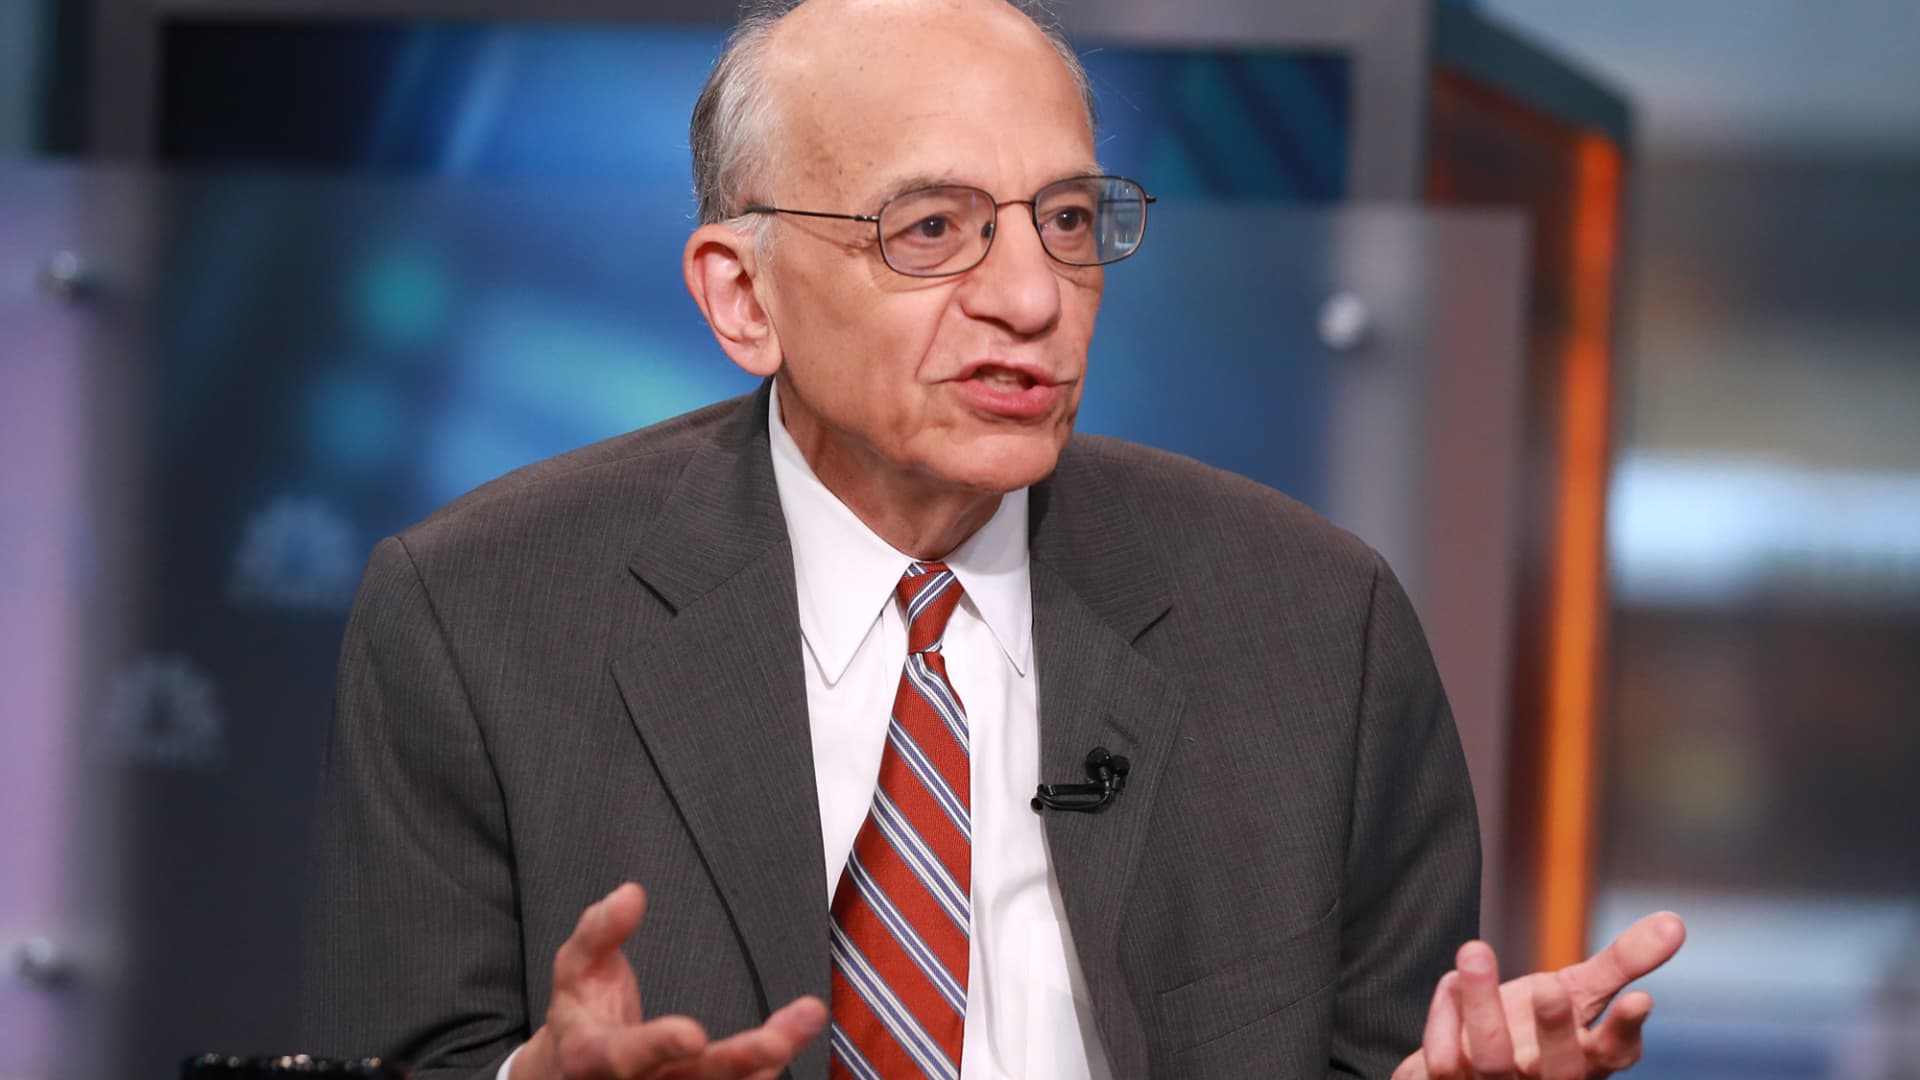 Stocks could rally as much as 20% in 2023, Wharton’s Jeremy Siegel says